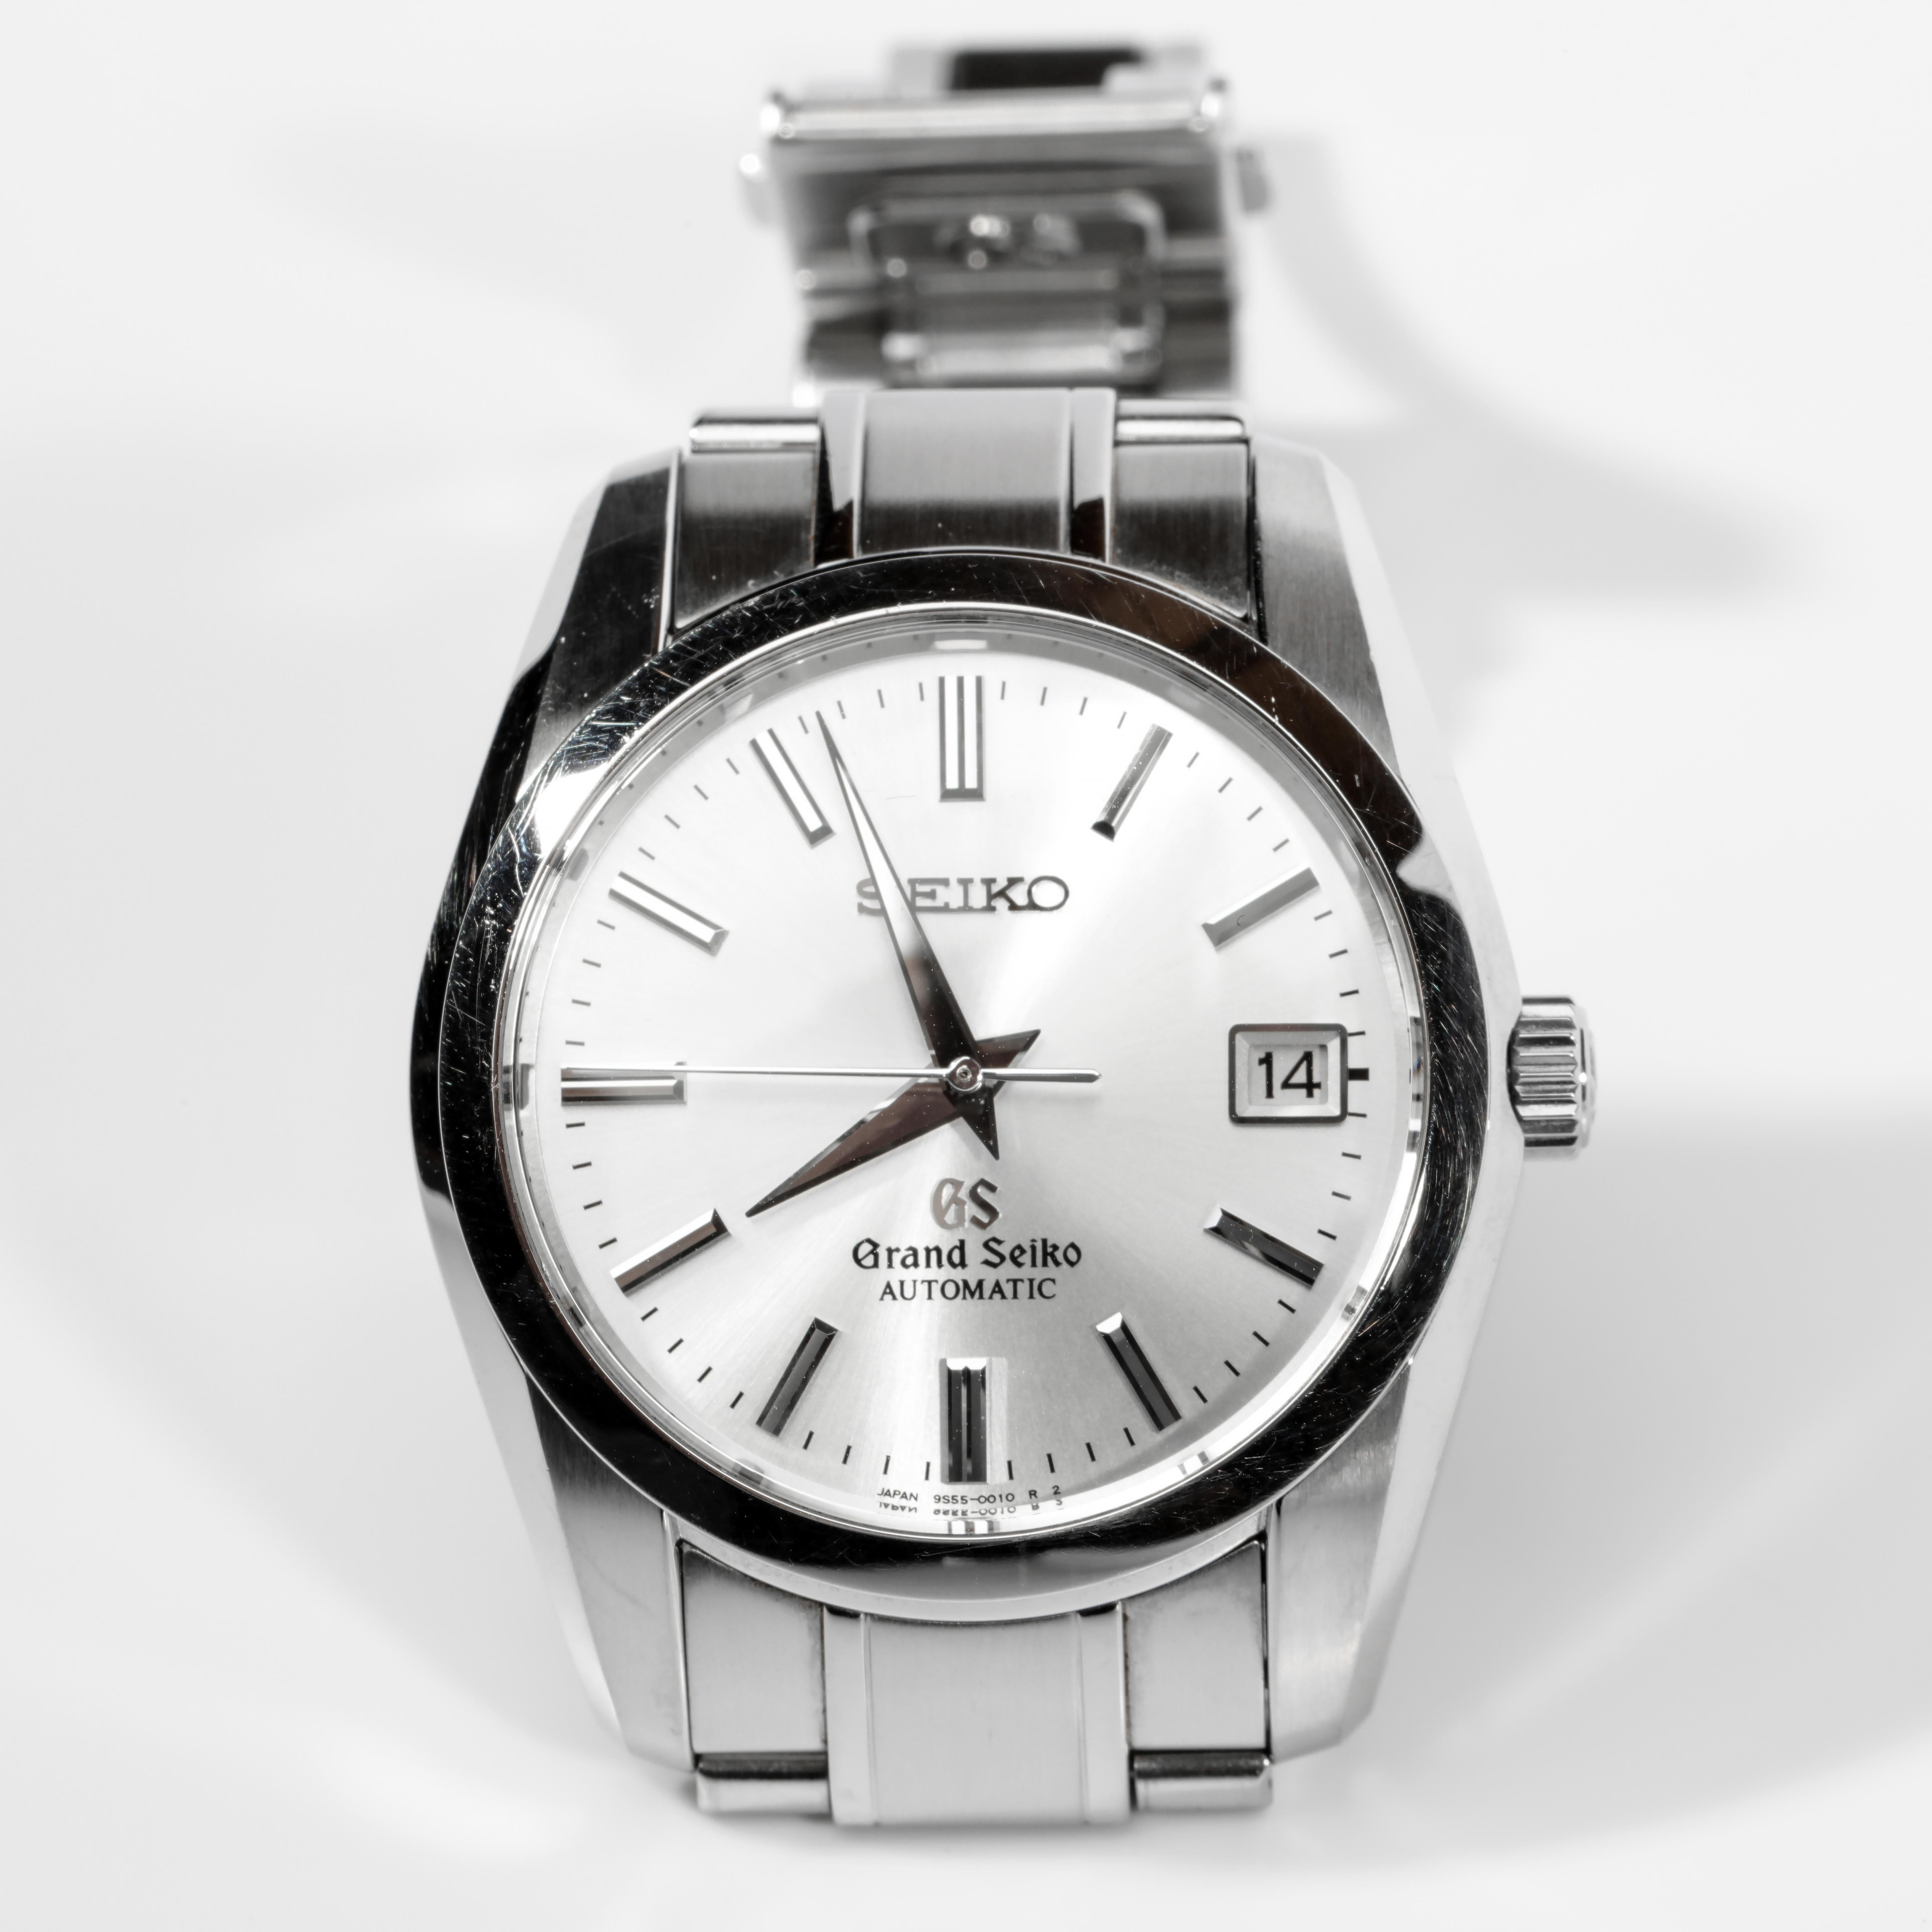 This sleek, 36mm stainless steel mechanical automatic watch is among the finest mechanical watches ever made. You. may be familiar with the name, Seiko. Maybe your mom or dad wore a Seiko; no-nonsense timepieces that would provide decades of